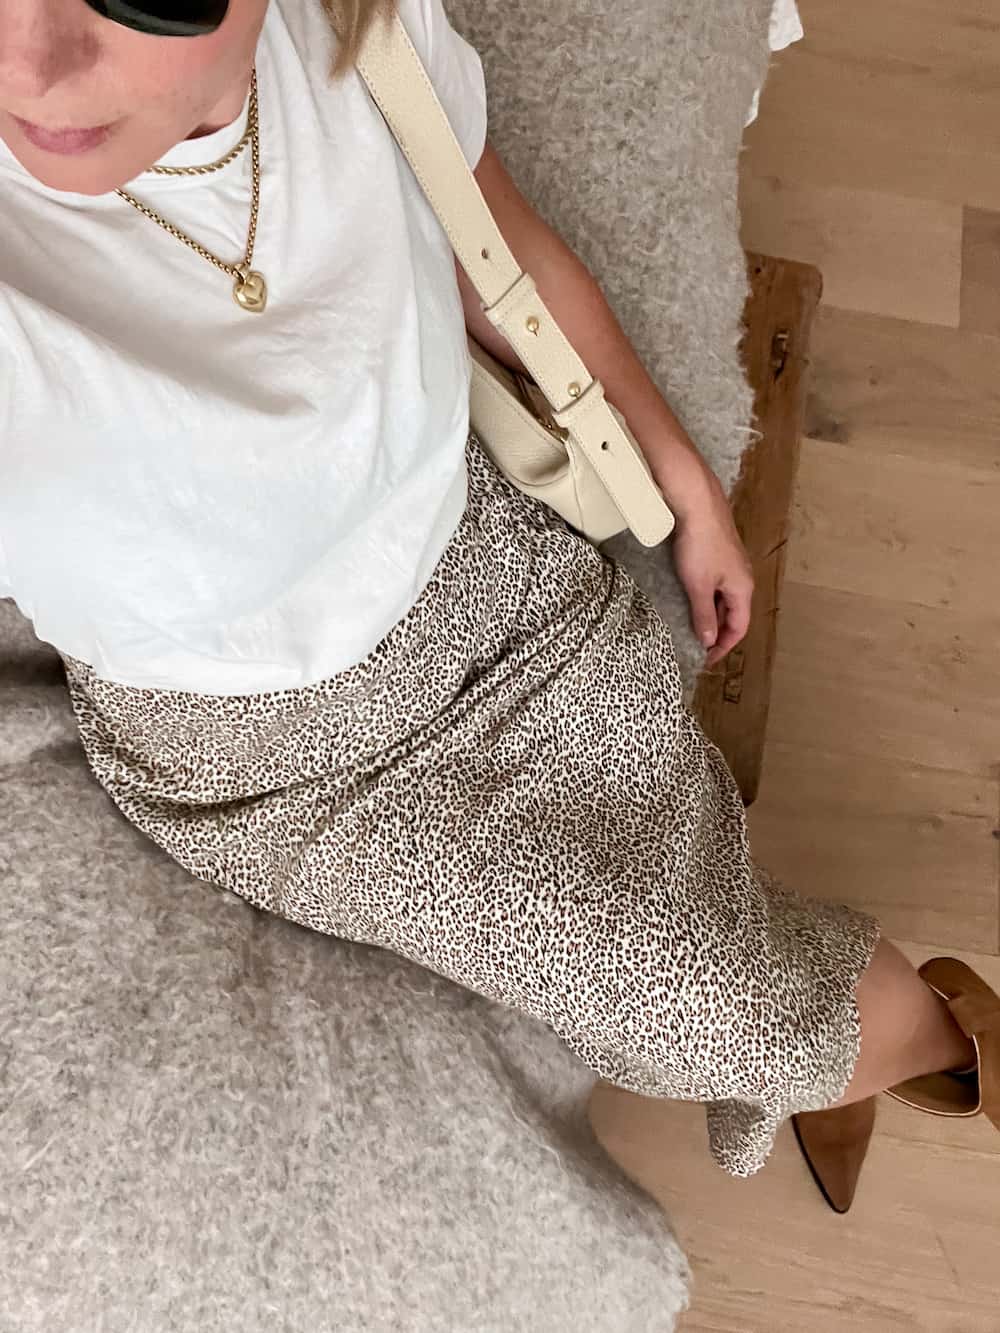 Christal wearing a white t-shirt with the Jenni Kayne leopard slip skirt and brown suede boots